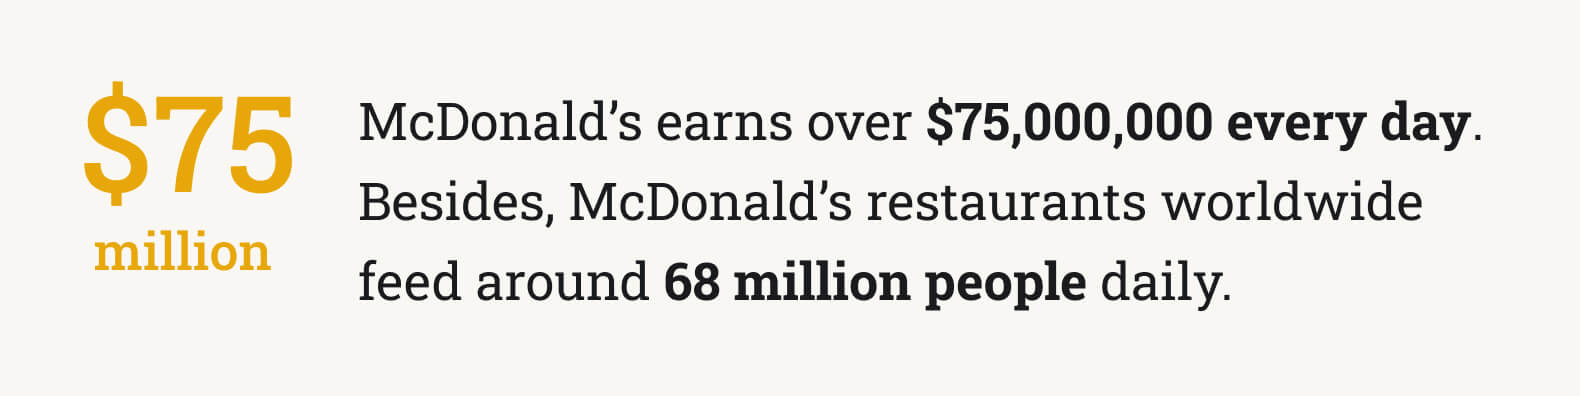 The picture provides information about the approximate daily income of McDonald's.